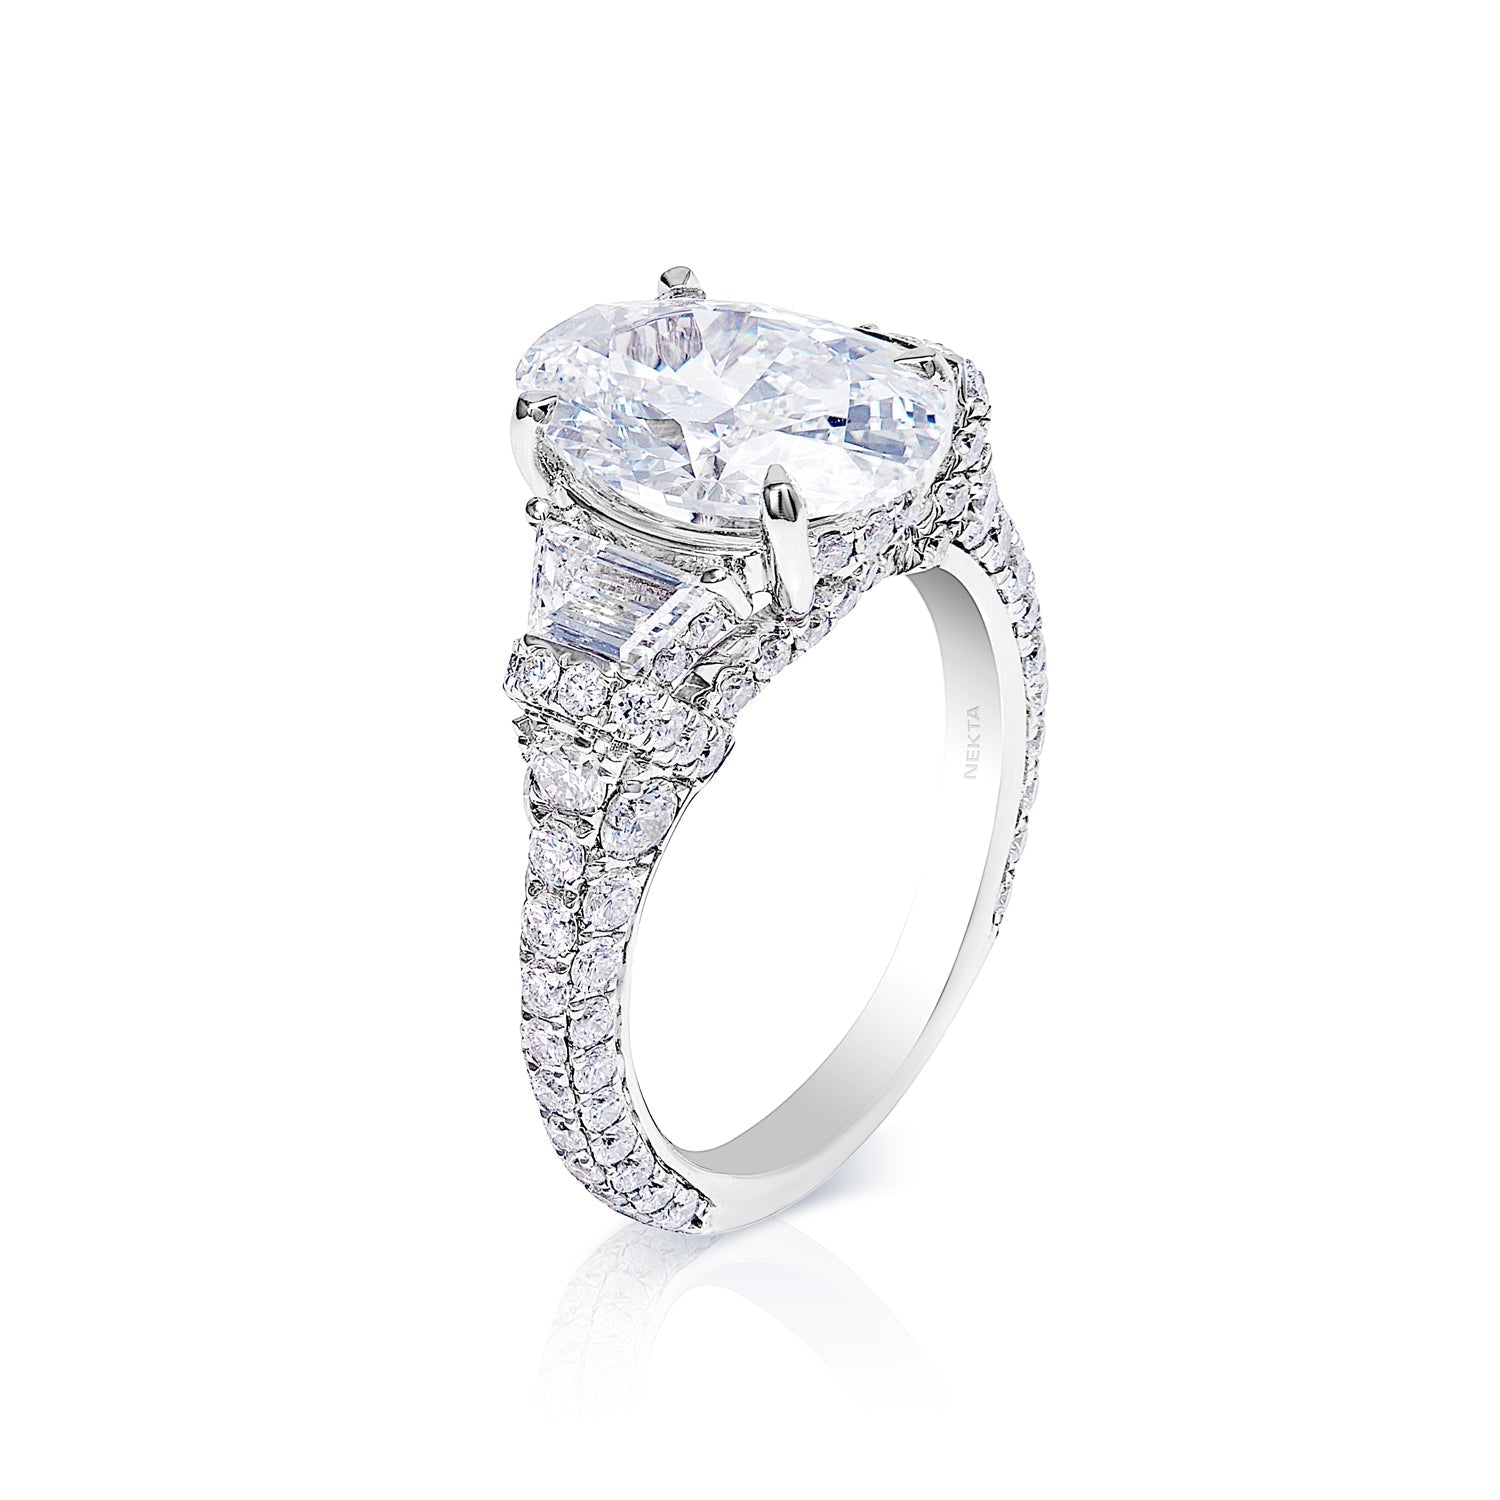 River 5 Carat Oval Cut VVS1 Earth Mined Diamond Engagement Ring in 18 Karat White Gold. GIA Side View